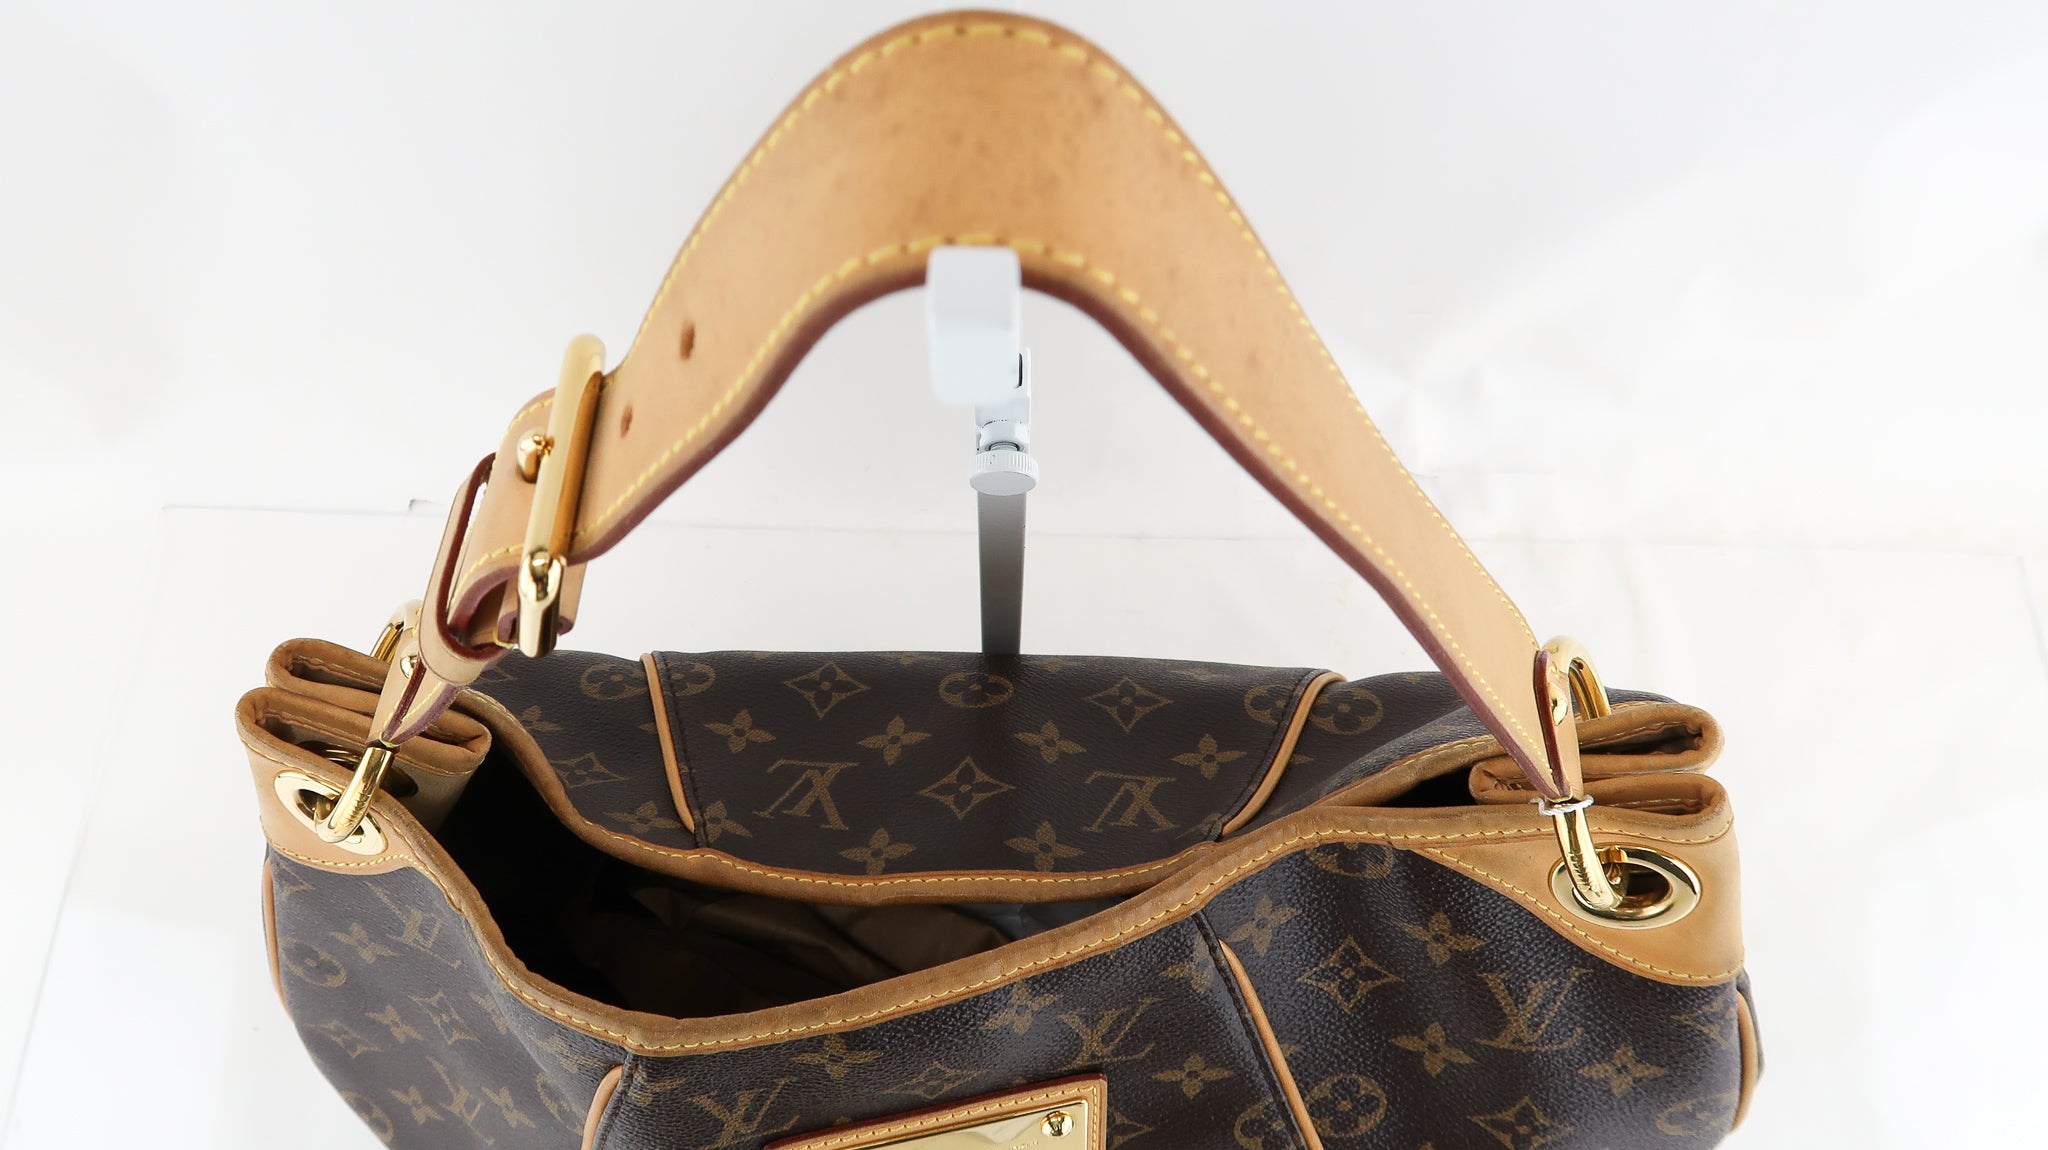 LOUIS VUITTON Galleria PM in Monogram Canvas - More Than You Can